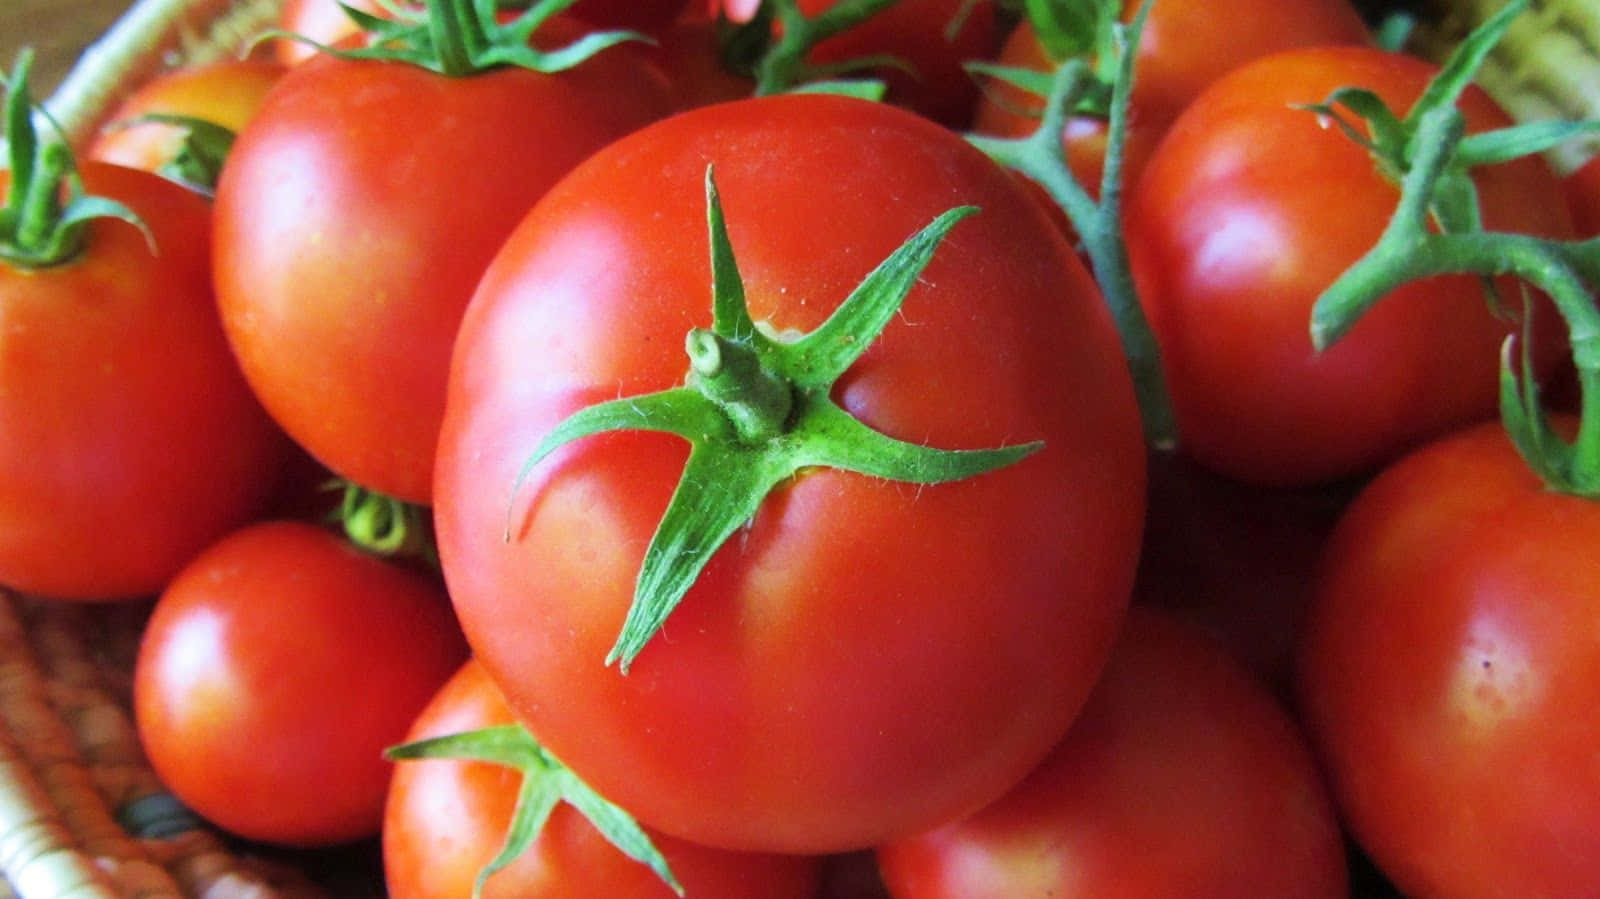 Delicious Tomatoes are the Perfect Addition to Any Meal